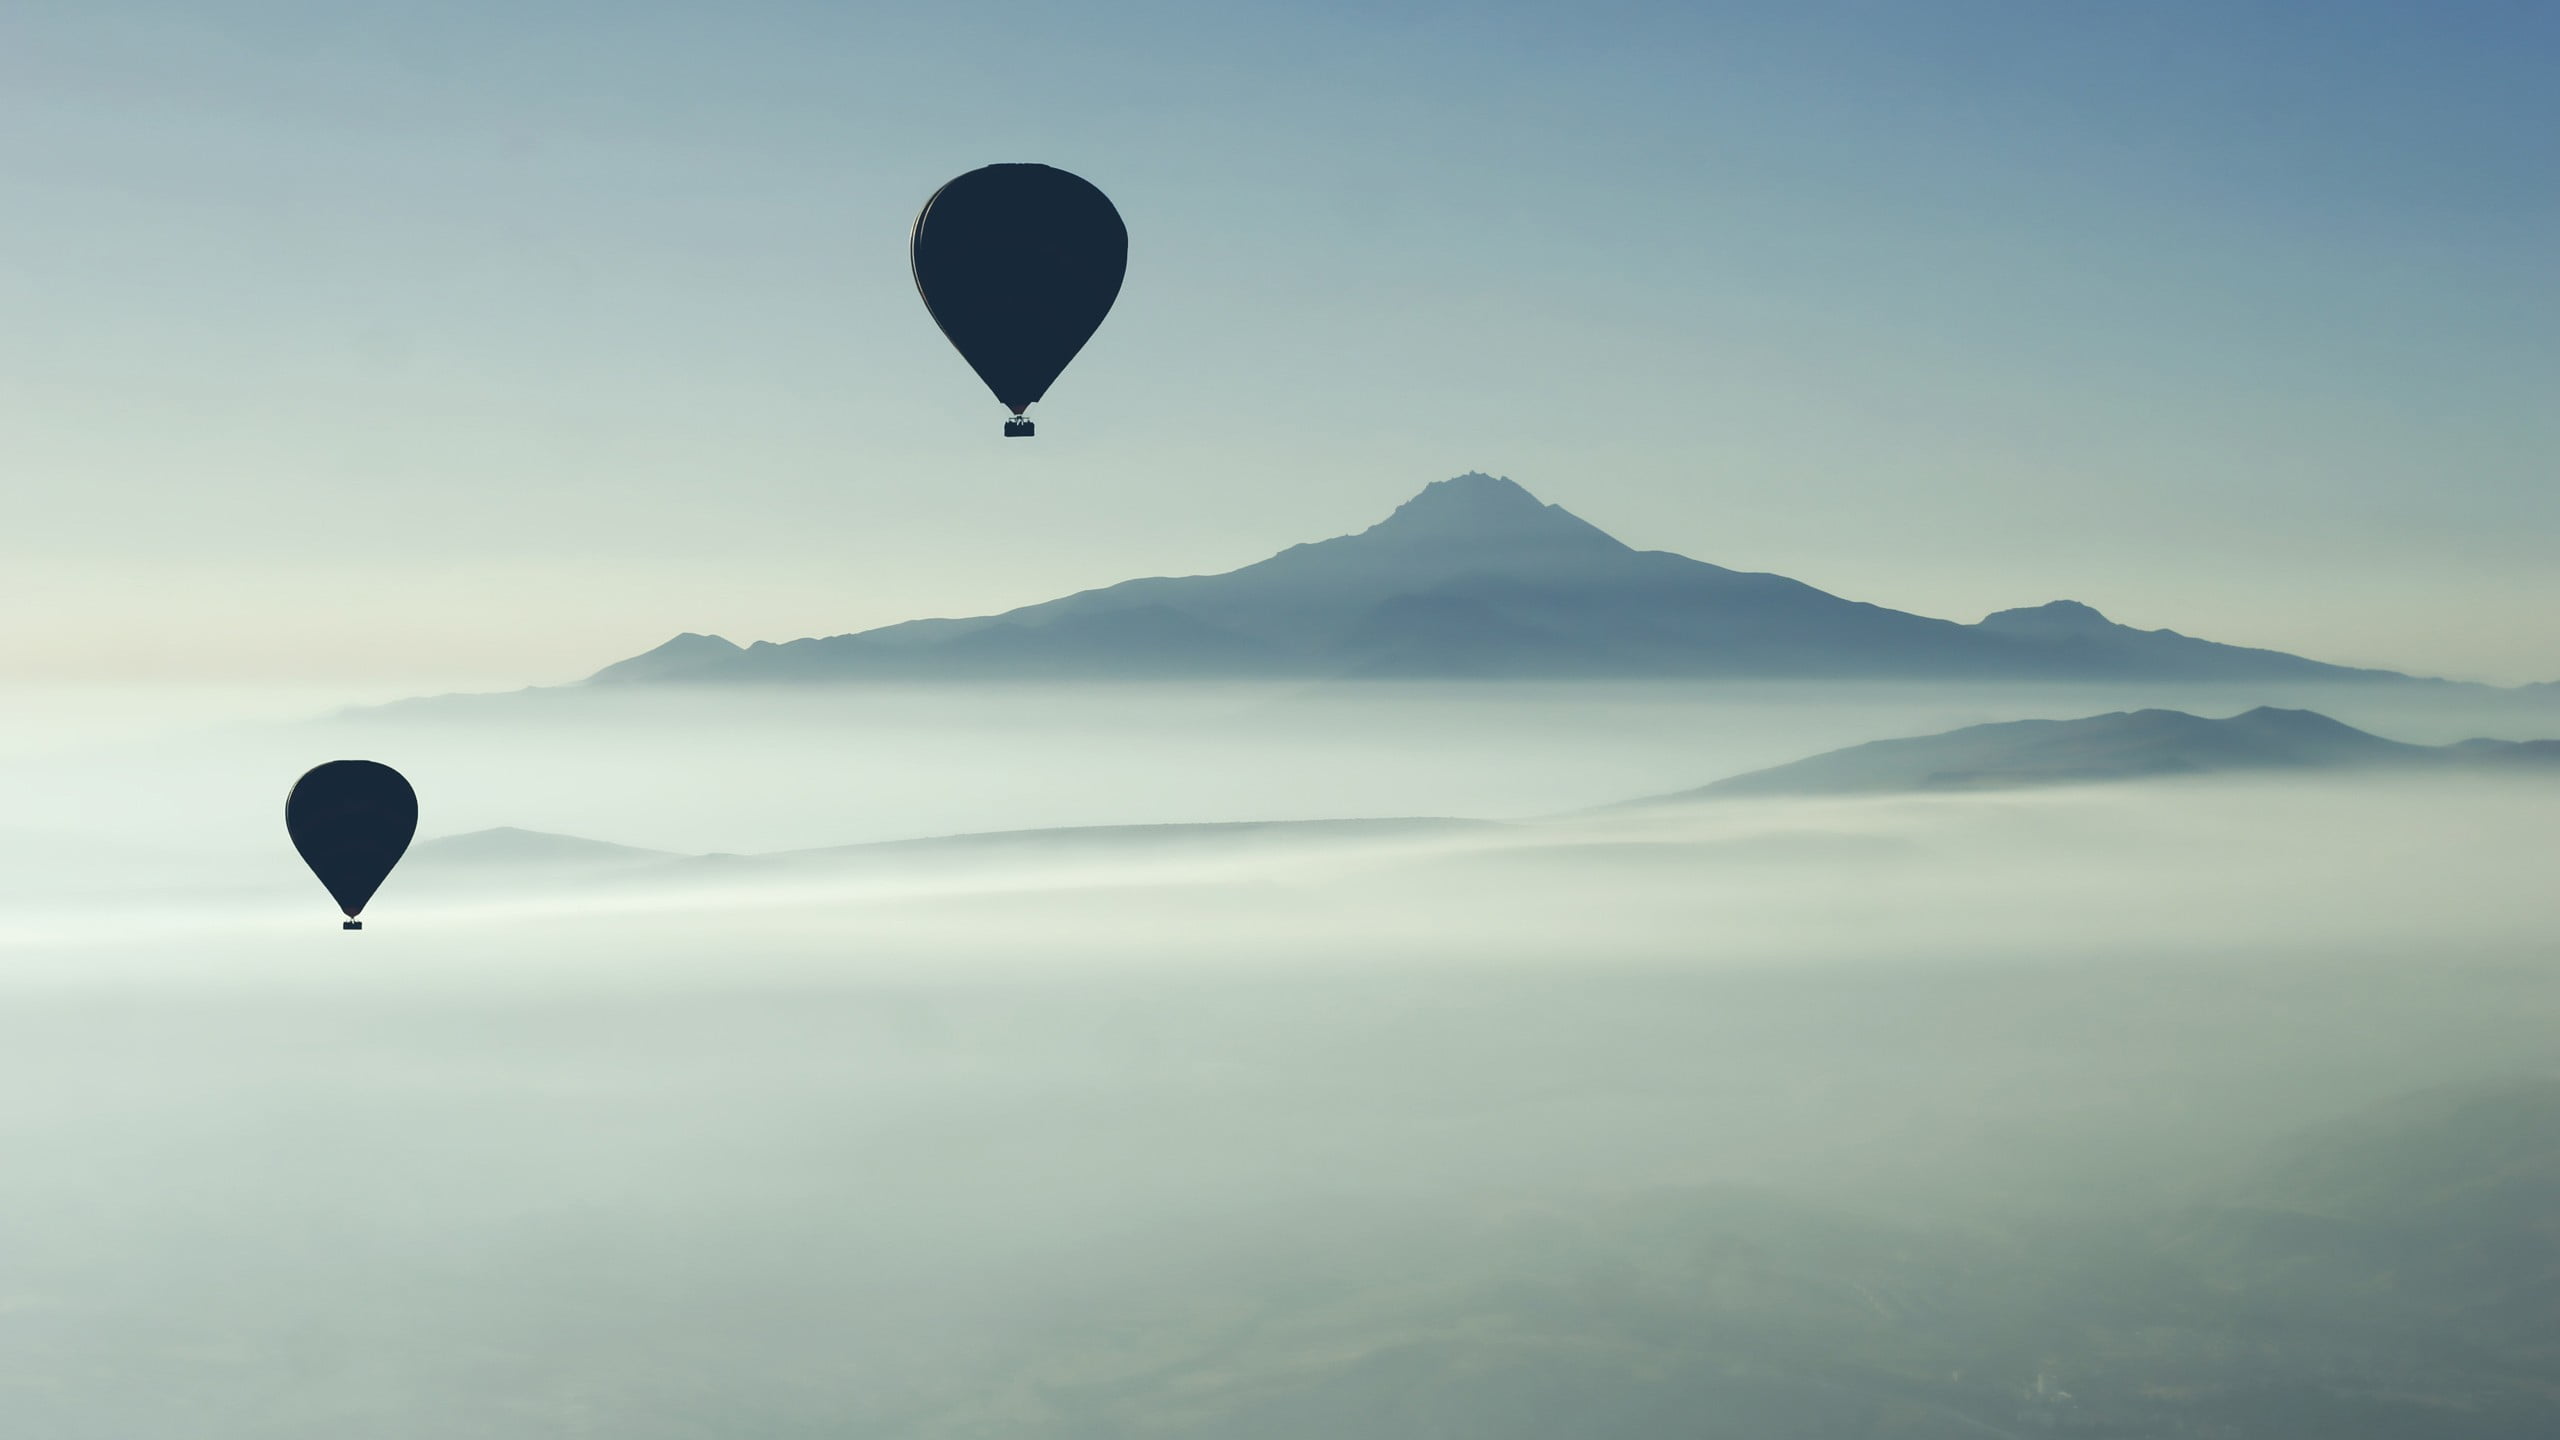 two silhouette of hot air balloons flying on sky with overlooking view coned mountain at daytime